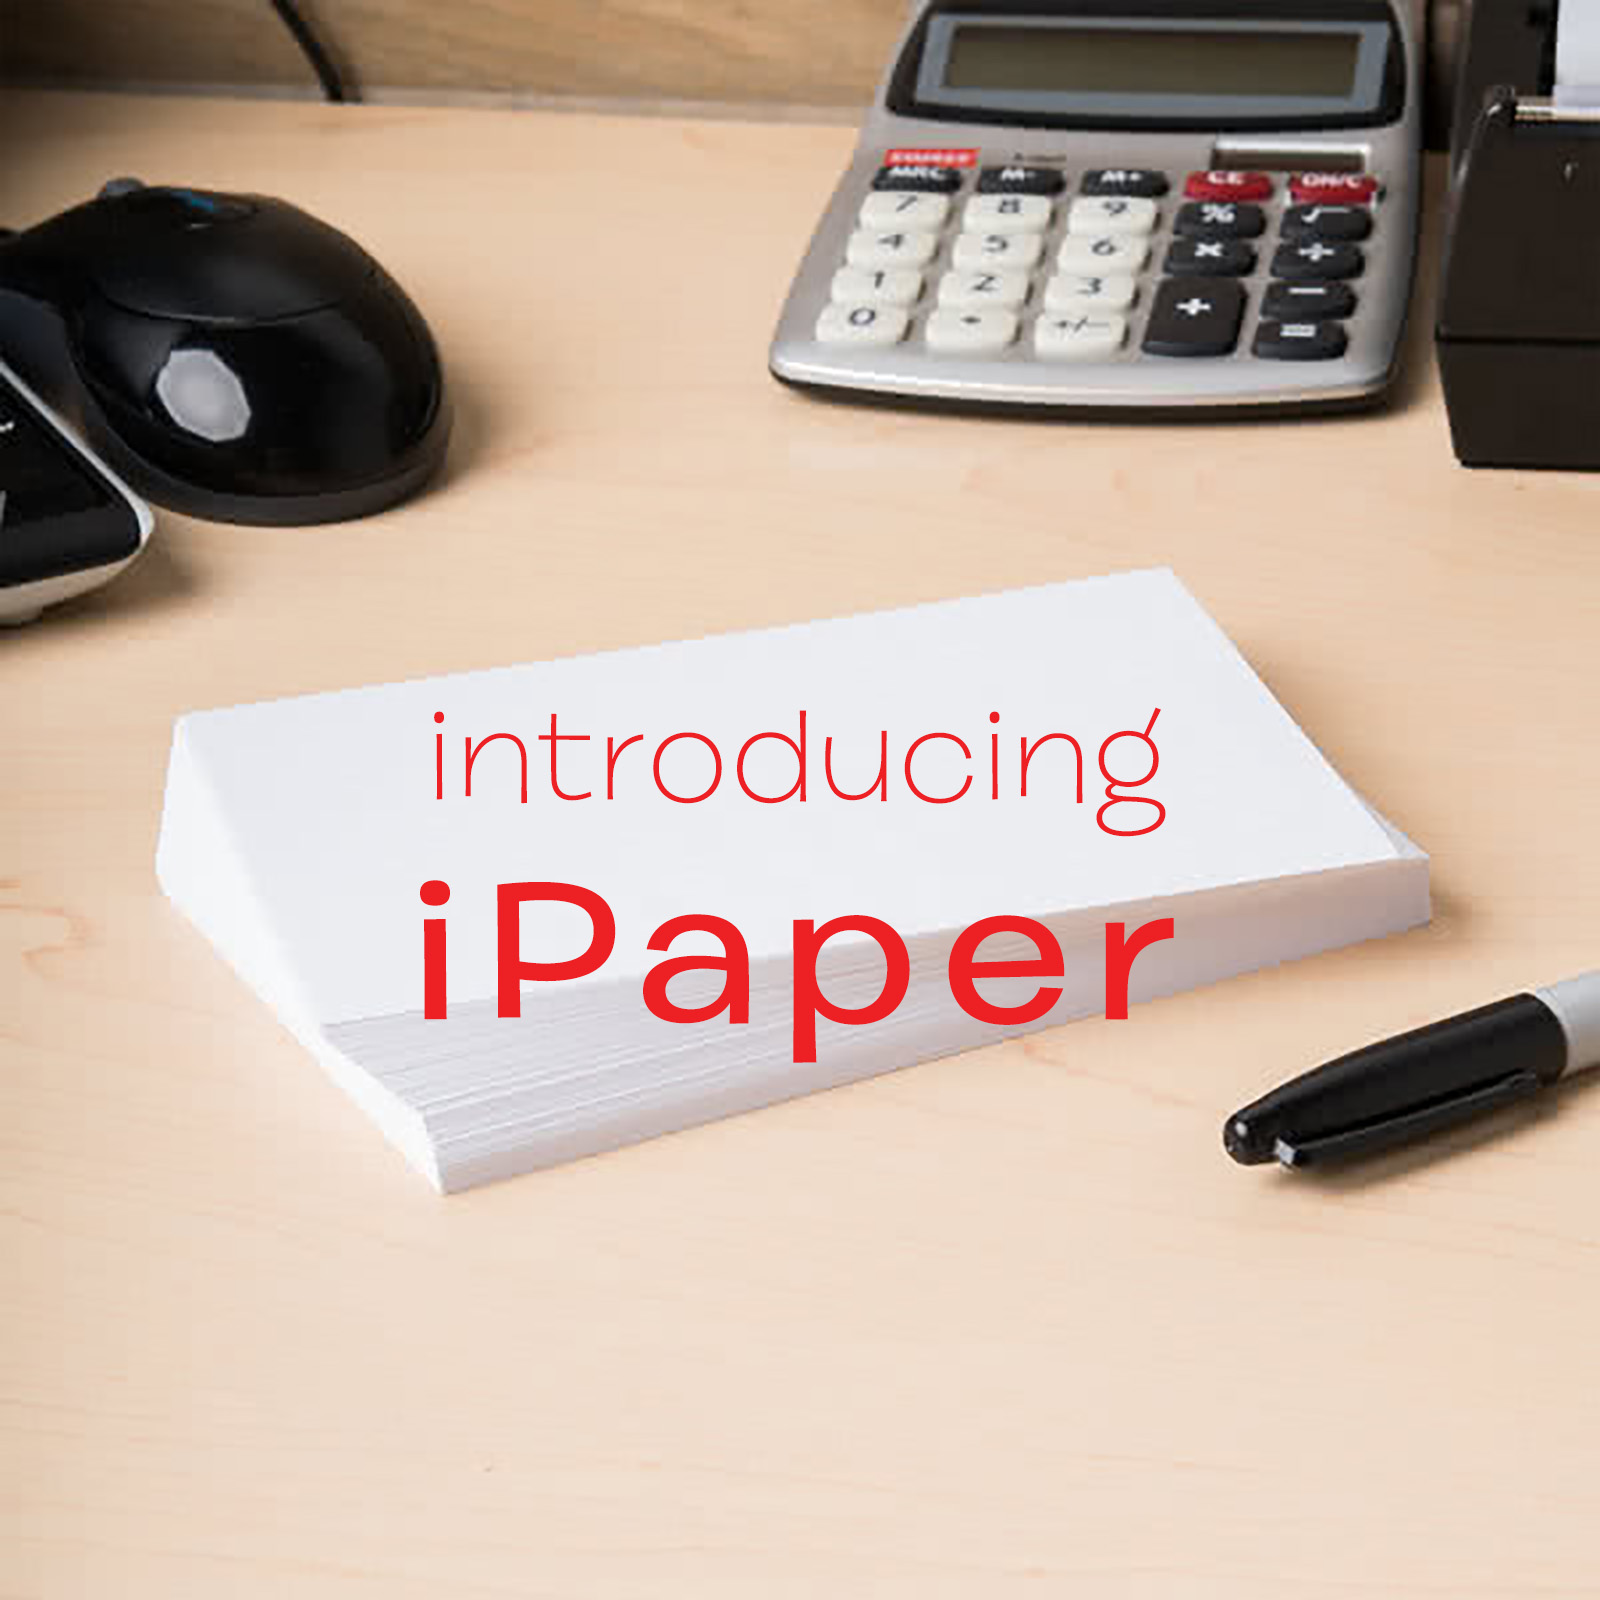 image of white index cards with the title "Introducing iPaper" superimposed